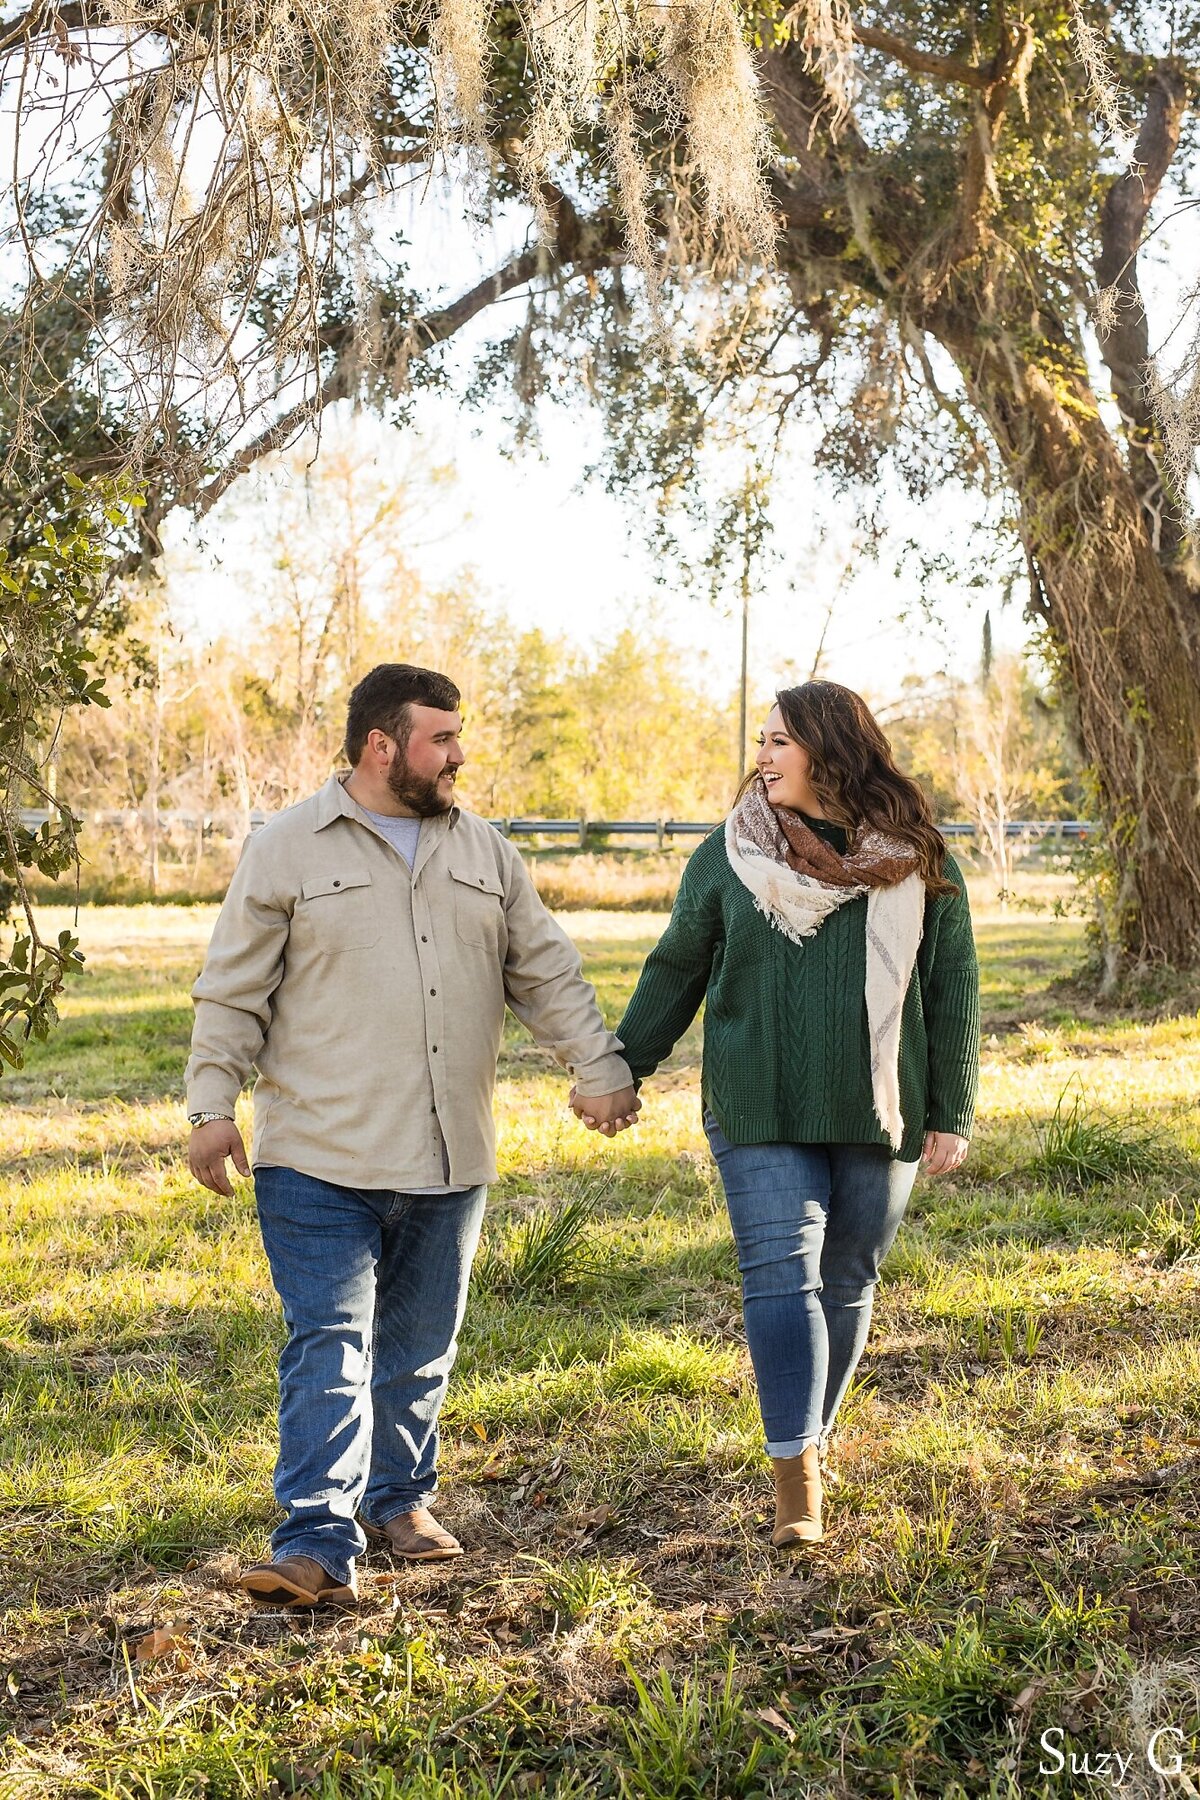 Engagement Photography- Suzy G Photography -Louisiana Wedding Photography, Louisiana Bride, Suzy G Photography, www.suzygphotography.com, suzygphoto_0019